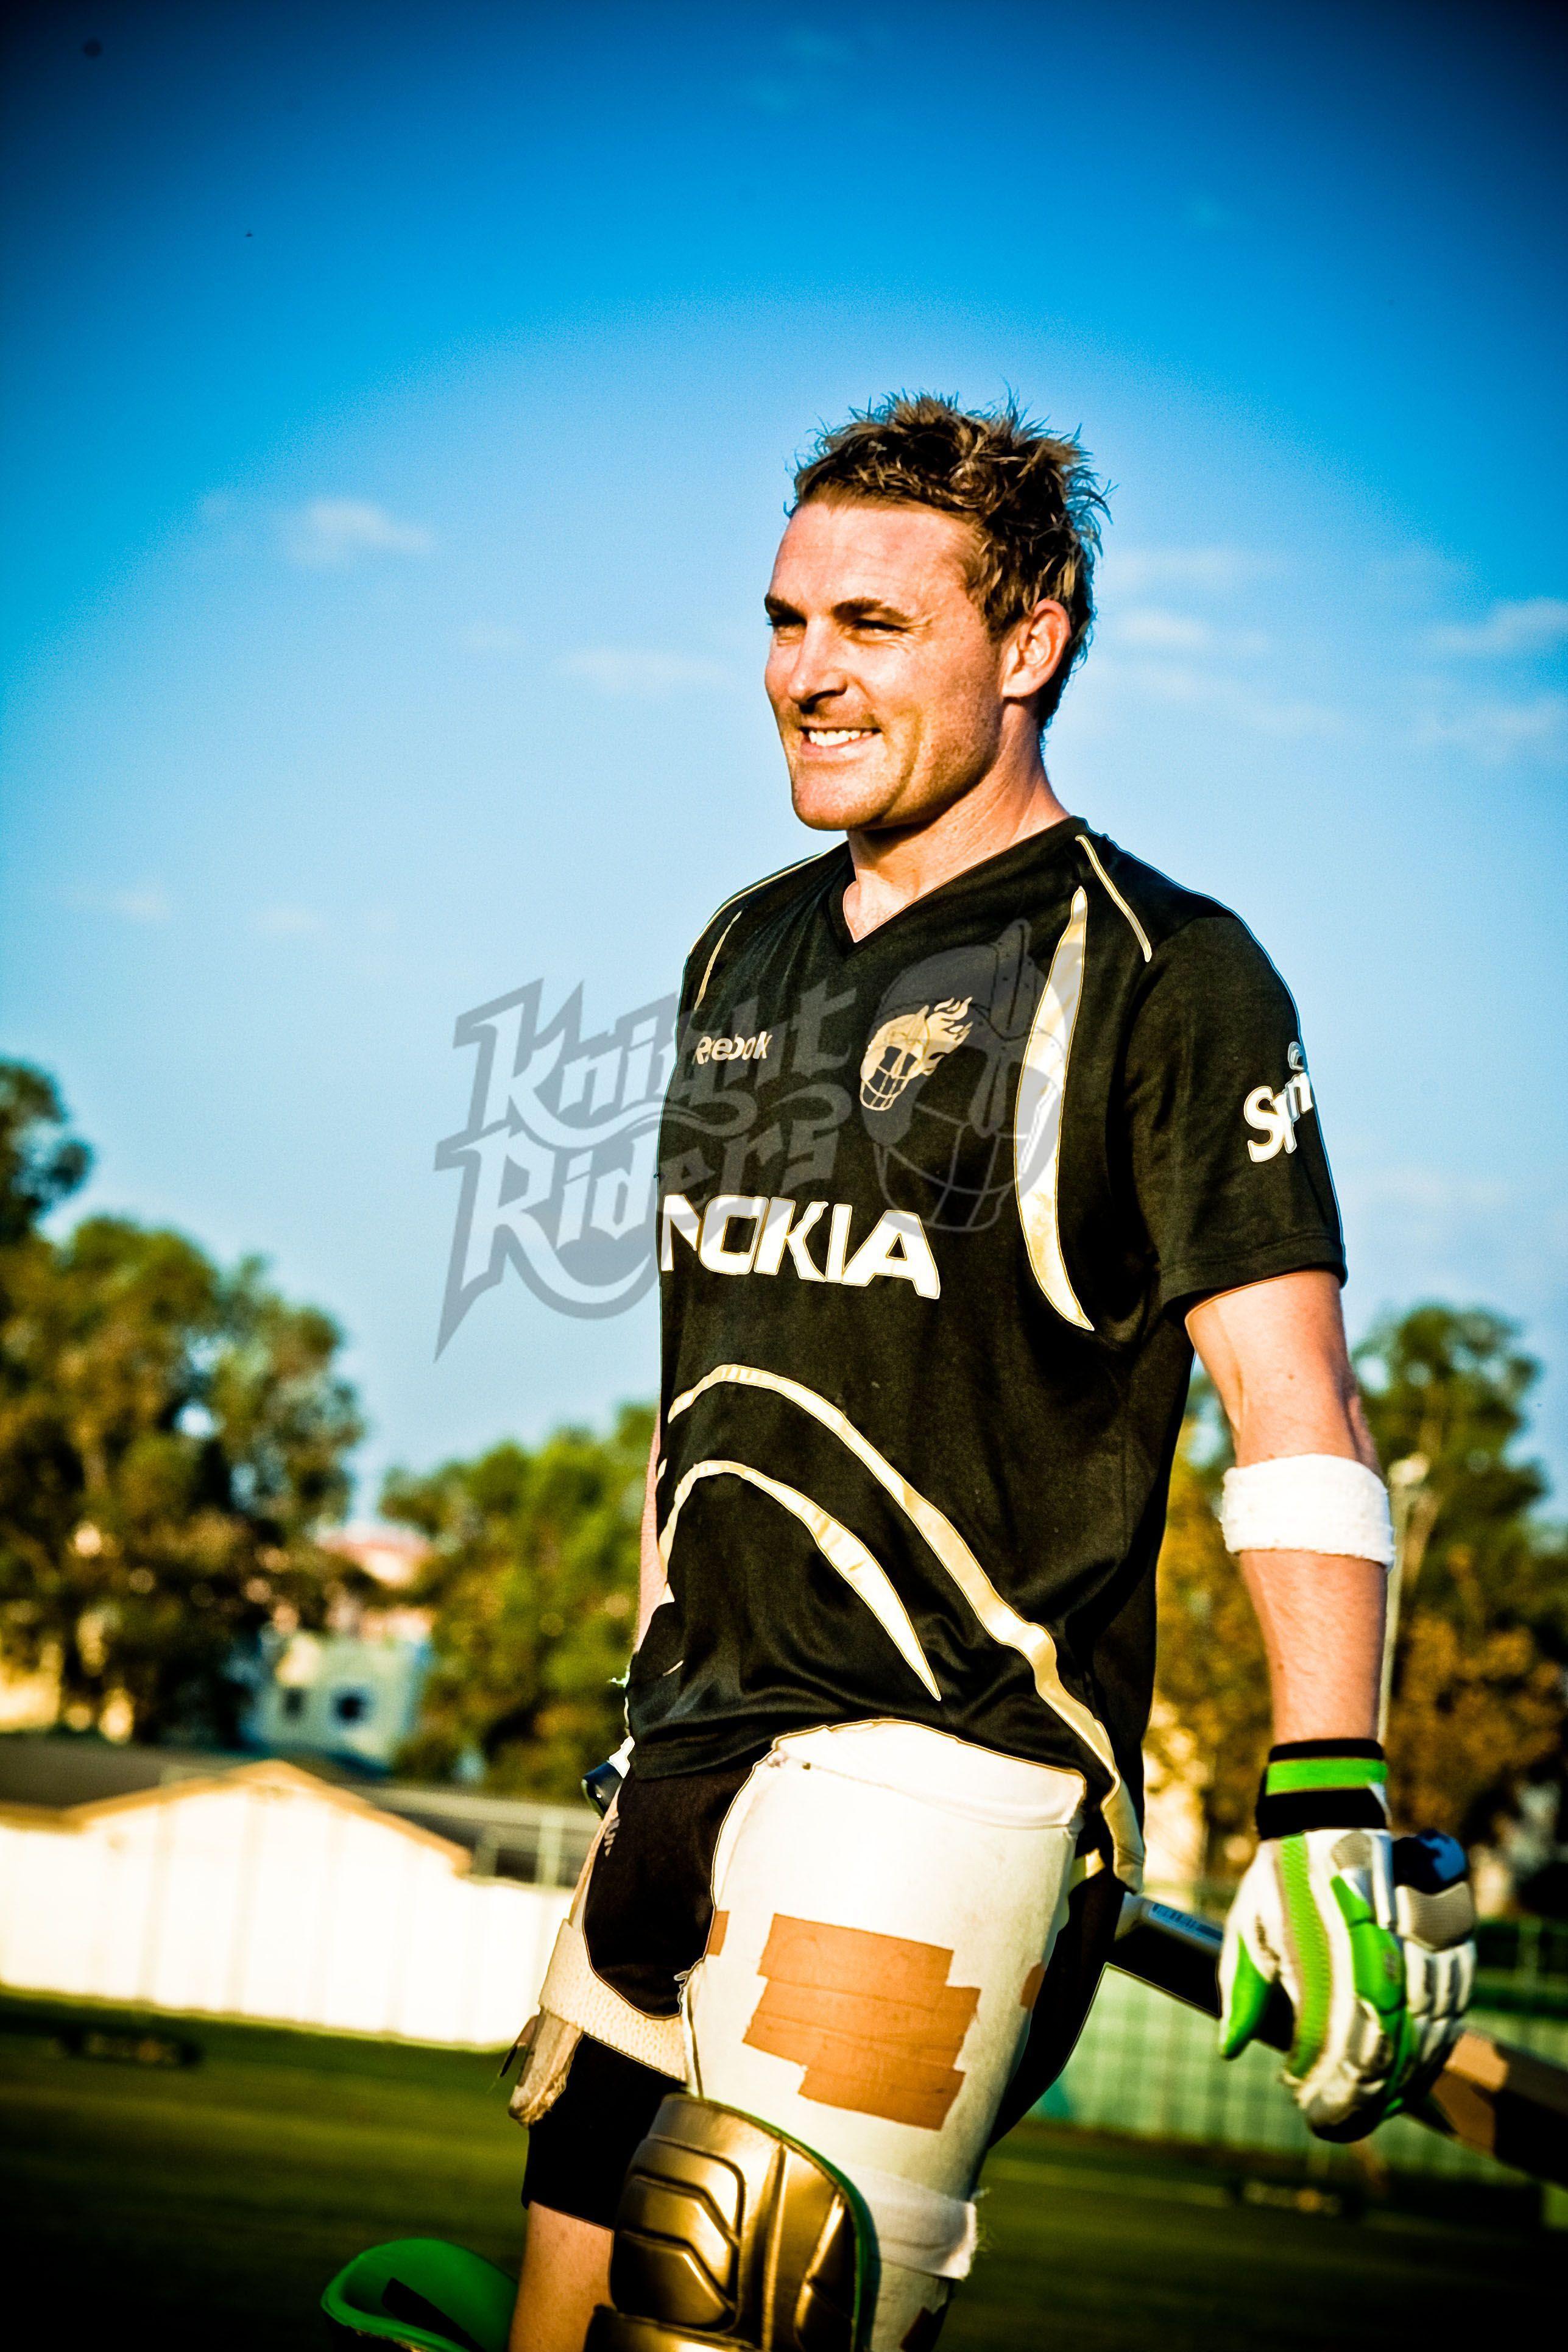 HQ Wallpaper Plus provides different size of Brendon McCullum